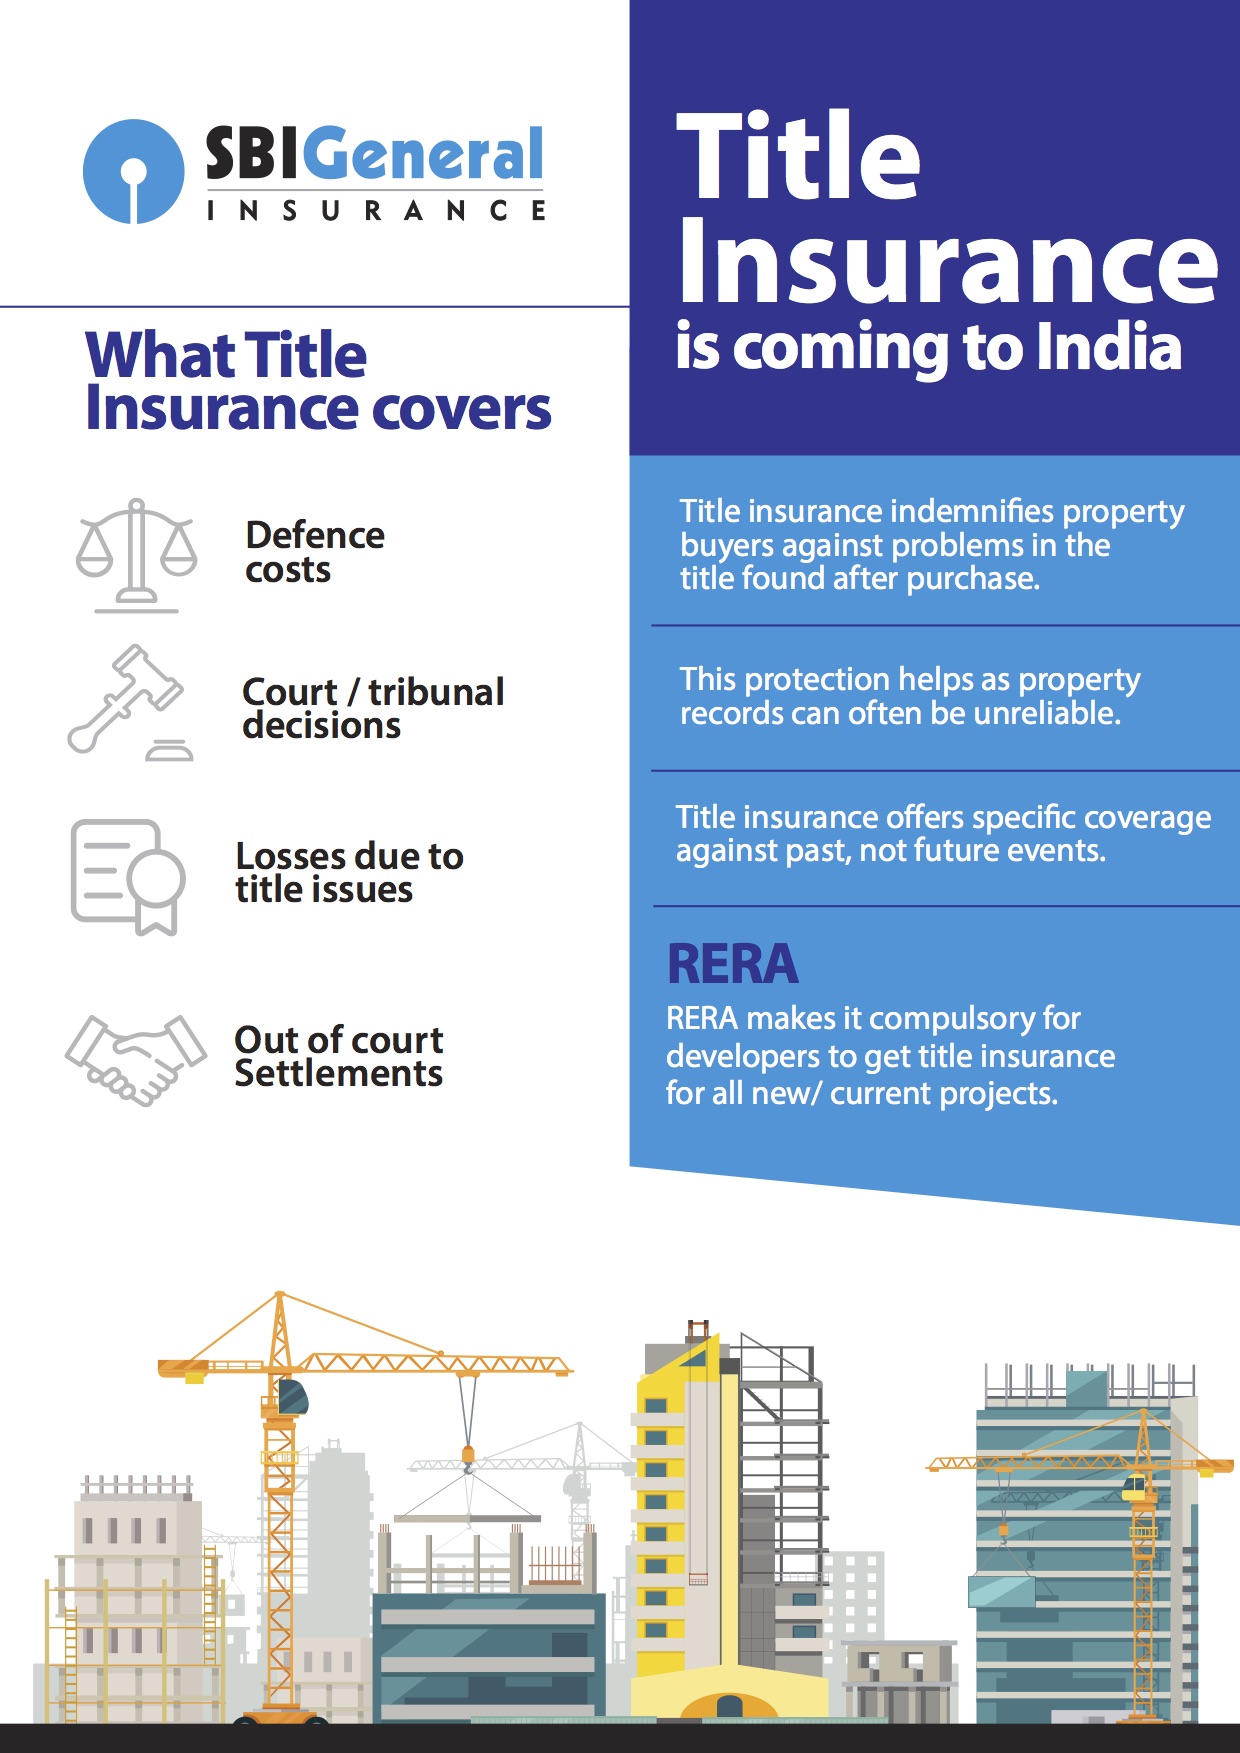 Know your rights – RERA and Title Insurance